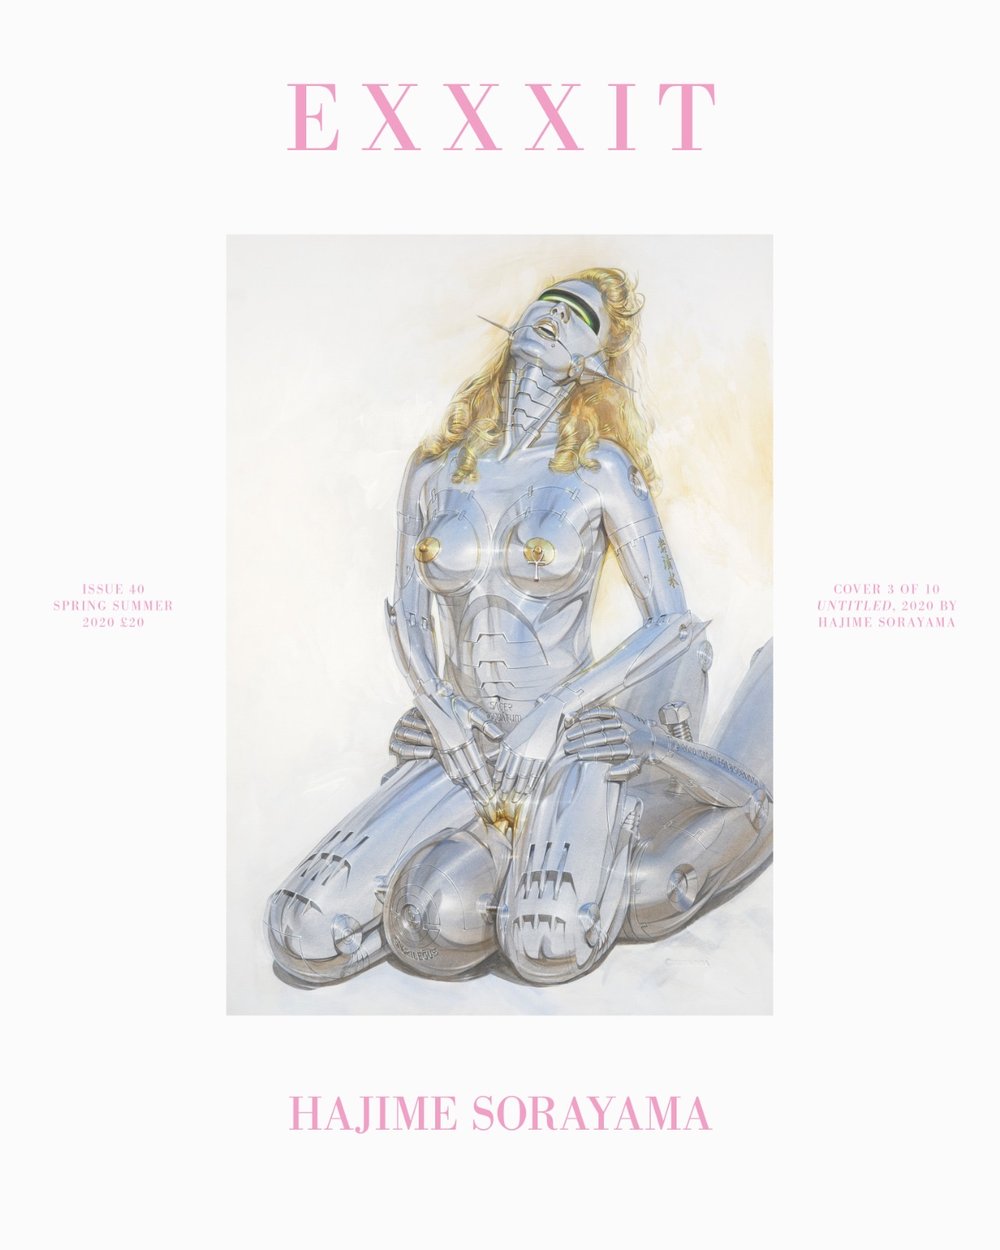 Image of EXIT ISSUE 40 SPRING SUMMER 2020 HAJIMI SORAYAMA ***SOLD OUT***